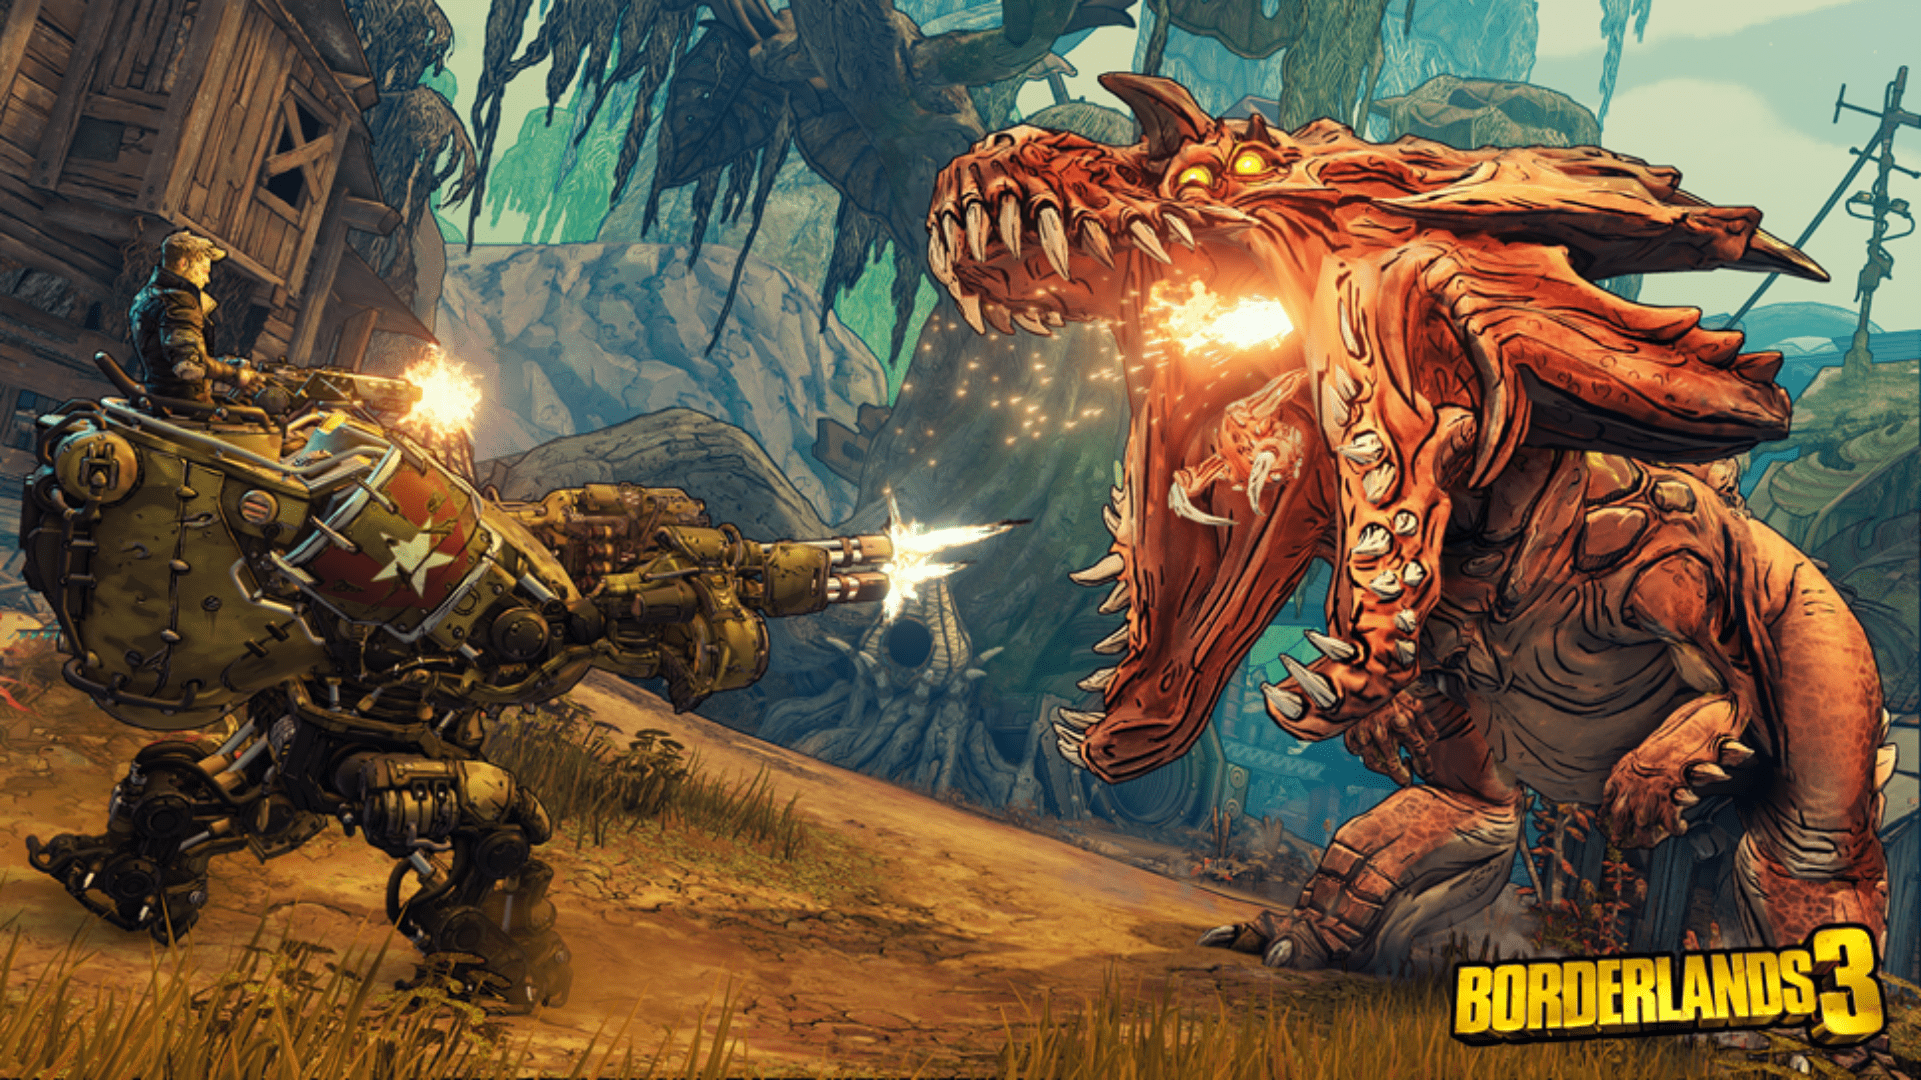 Borderlands 3 Legendary Items Become More Accessible During Limited-Time Tomorrow